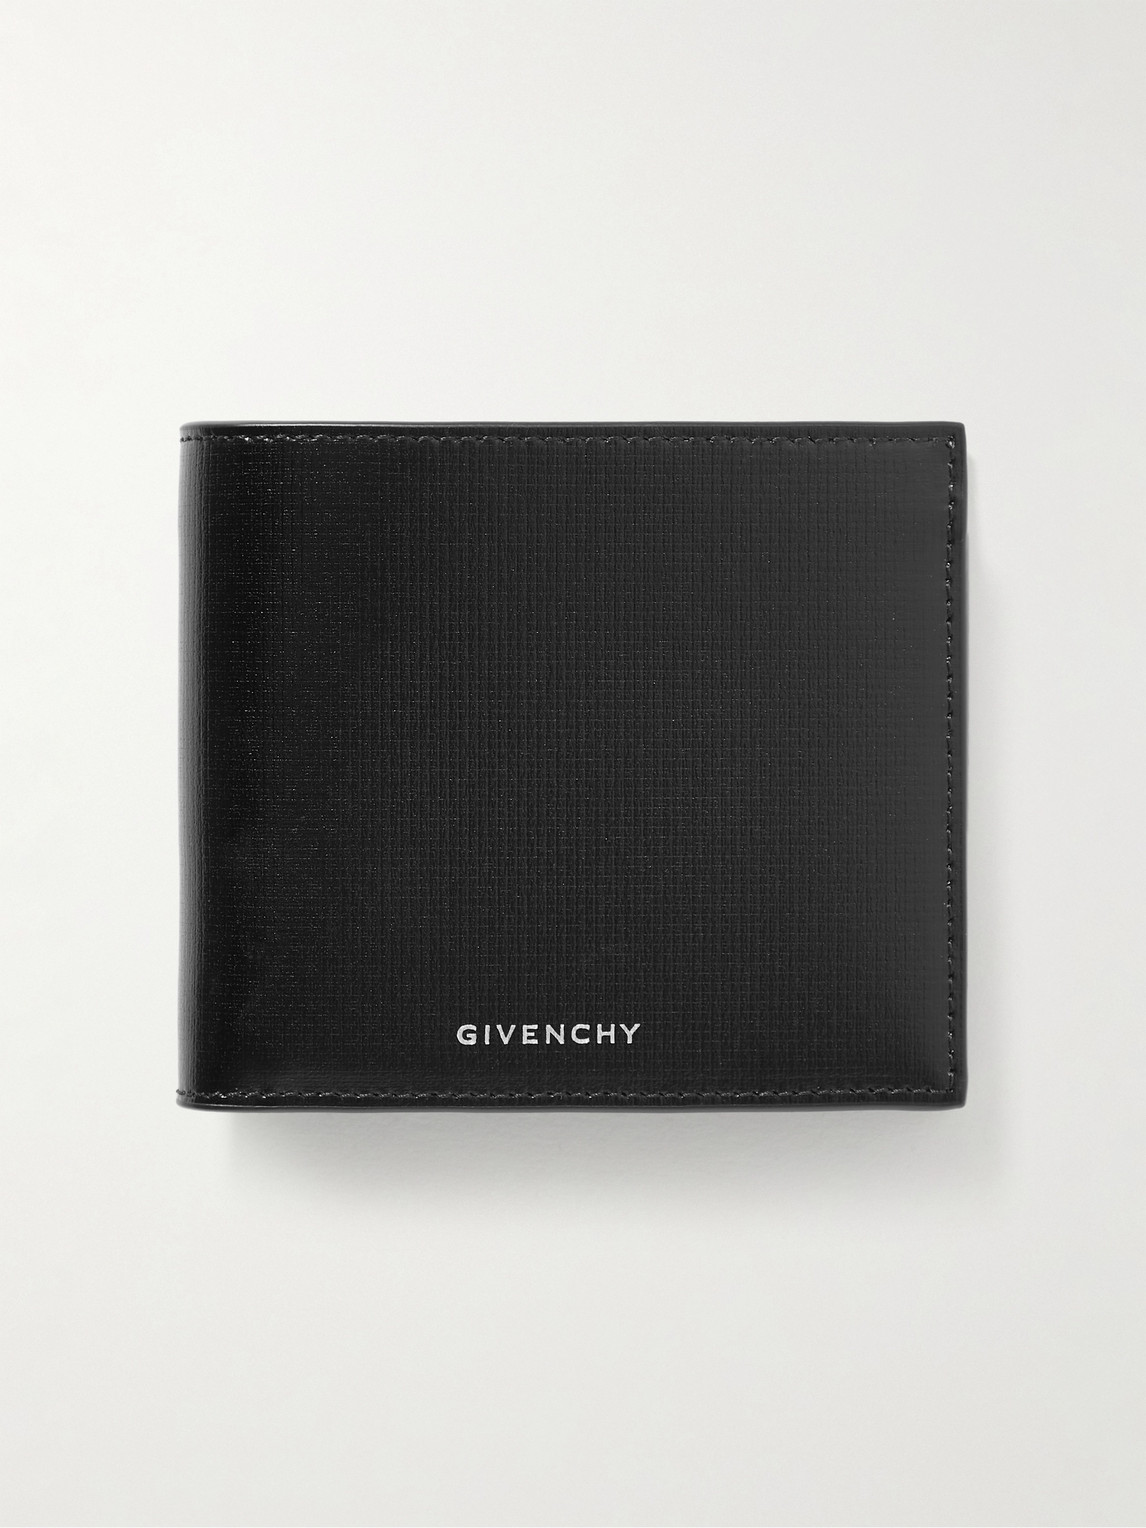 GIVENCHY LOGO-PRINT TEXTURED-LEATHER BILLFOLD WALLET